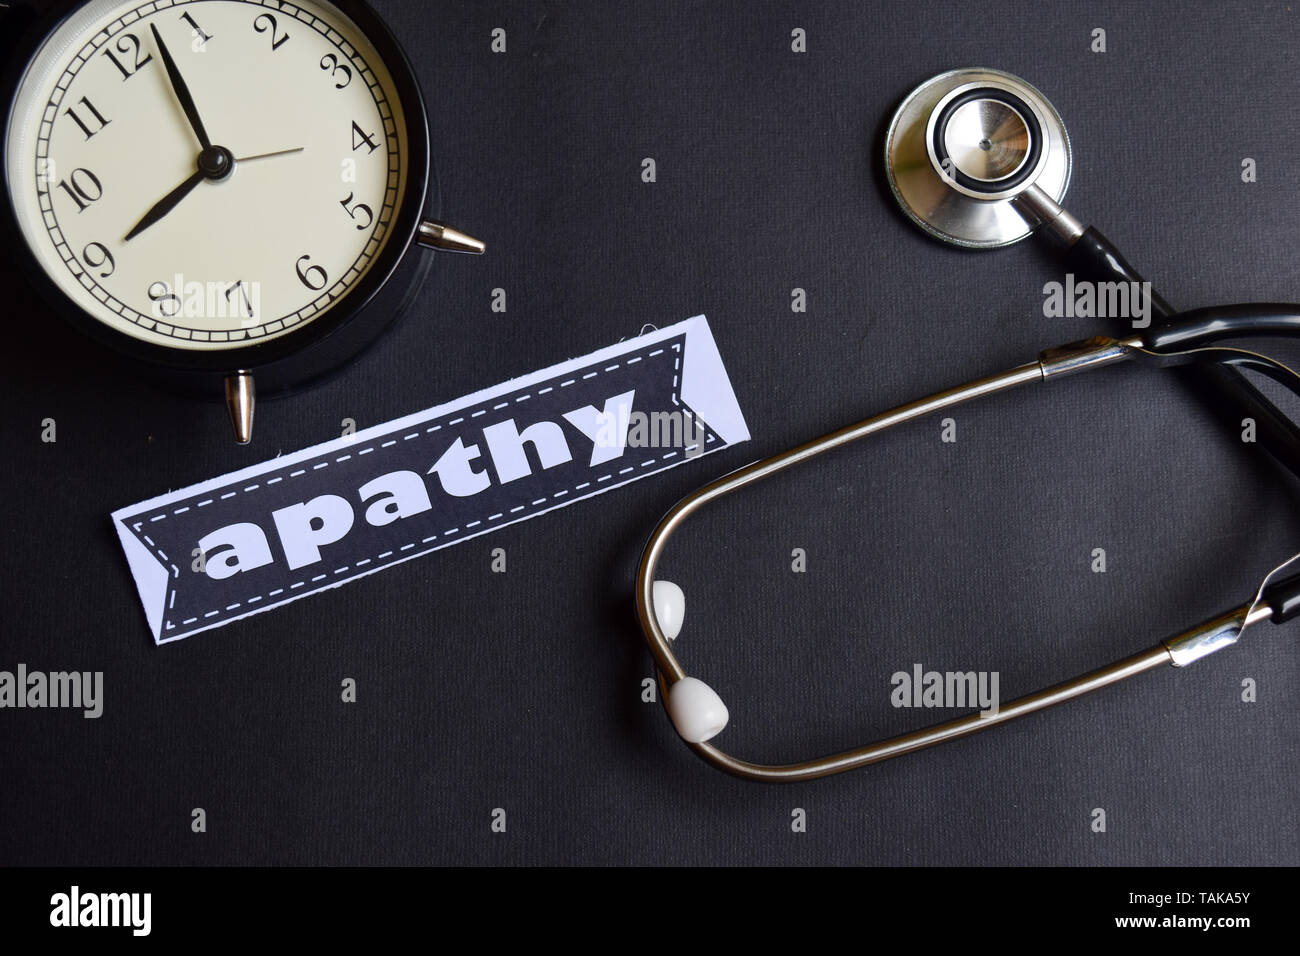 Apathy on the paper with Healthcare Concept Inspiration. alarm clock, Black stethoscope. Stock Photo